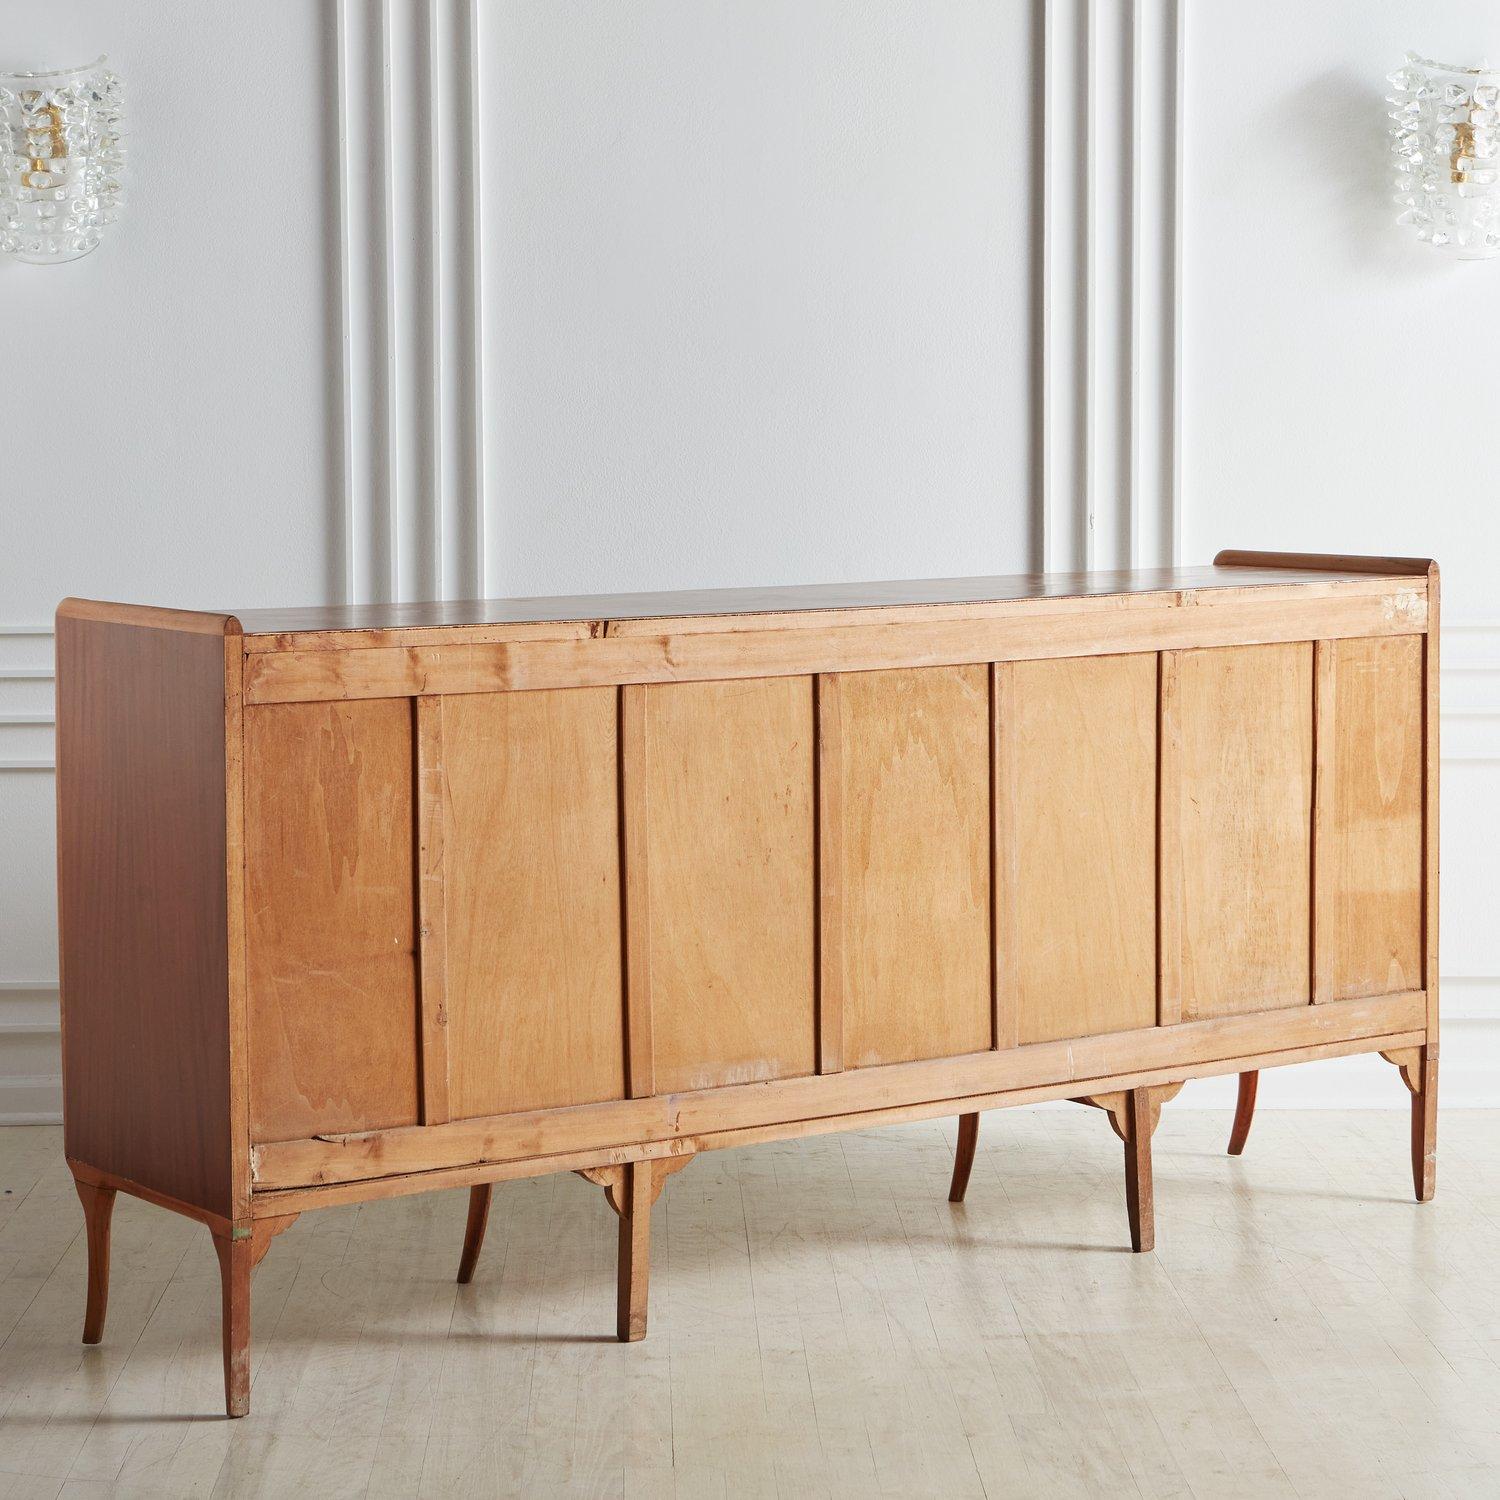 Teak and Birch Sideboard in the Style of Paola Buffa, France, 1970s For Sale 10